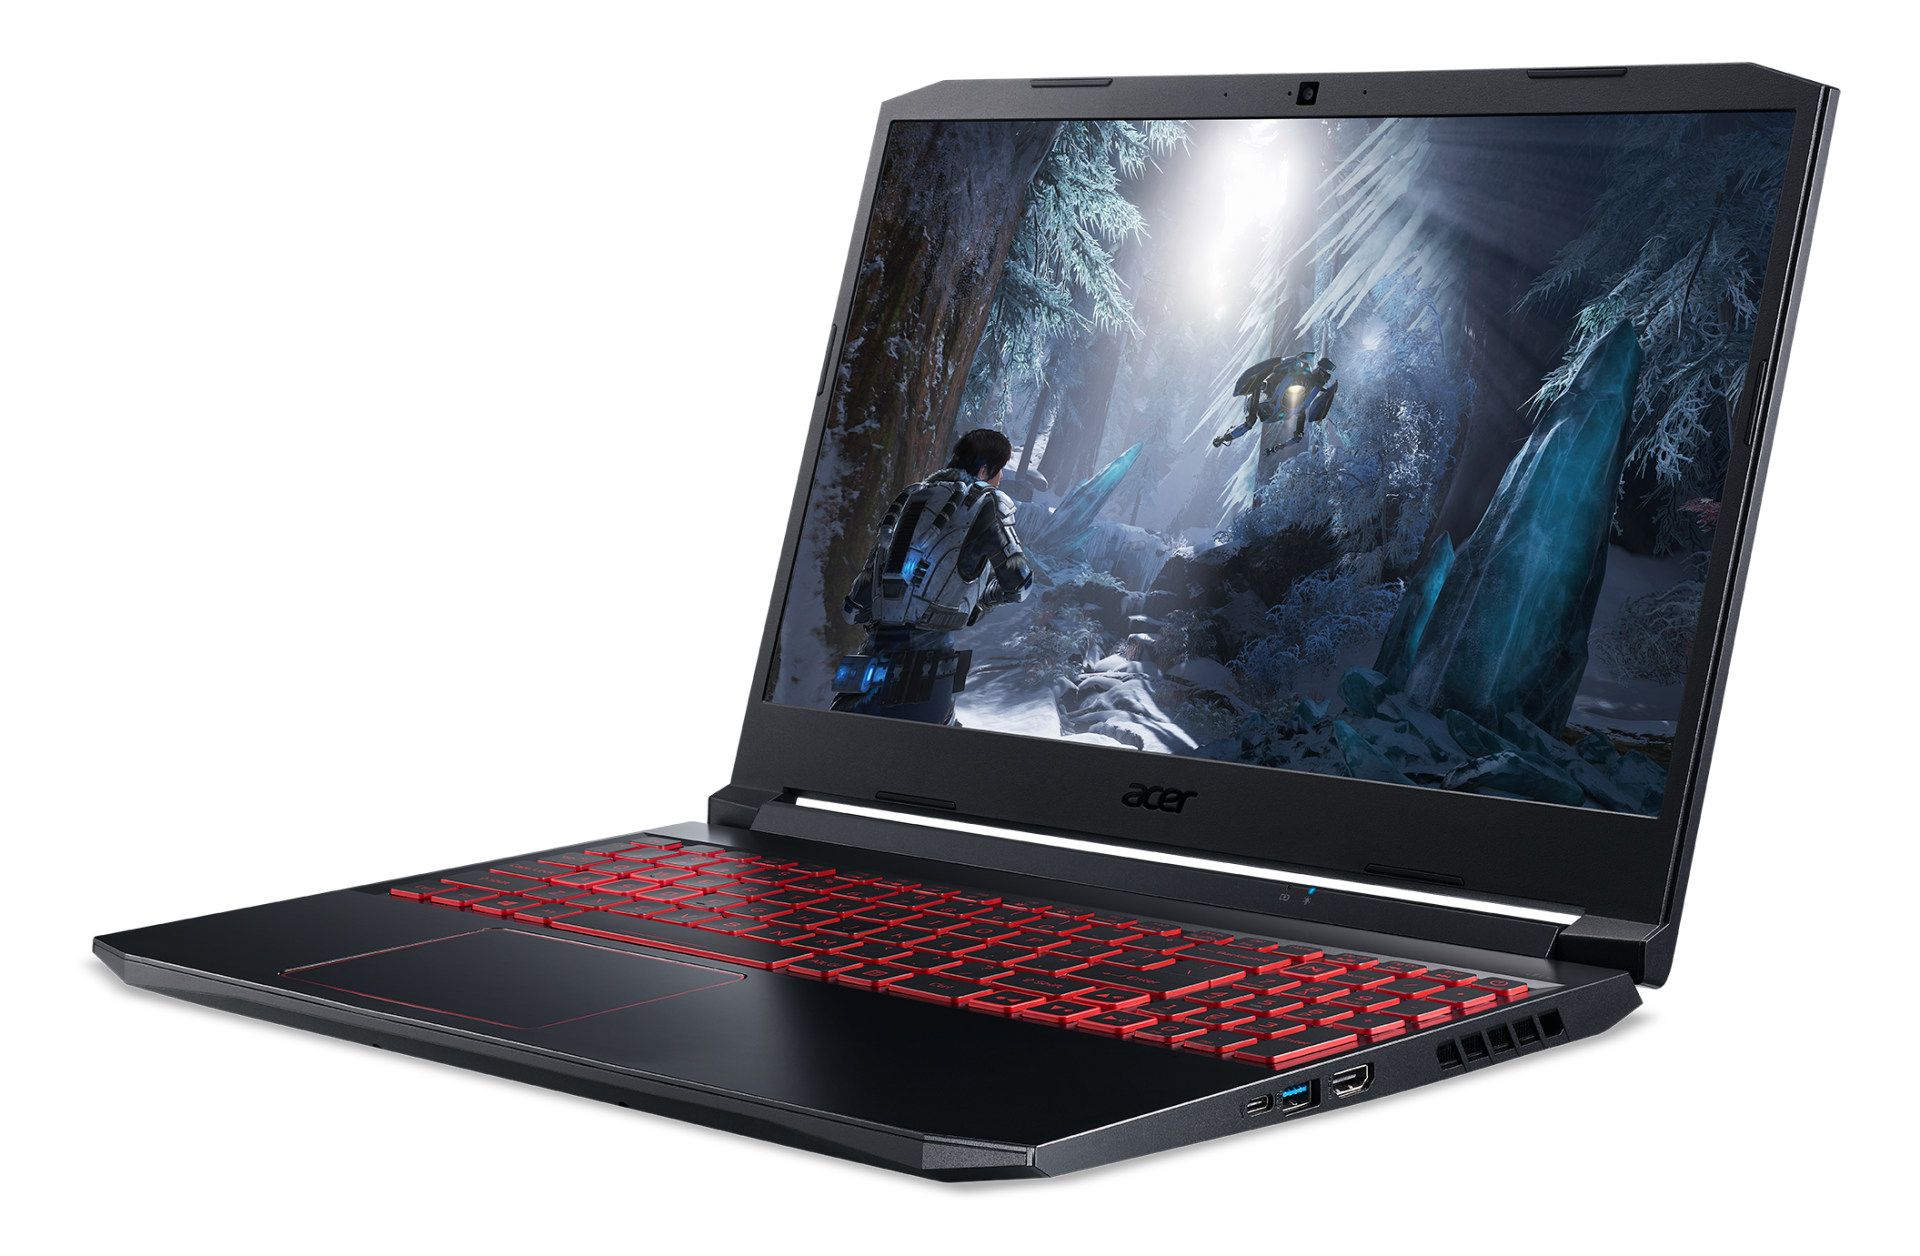 1 x Acer Nitro 5 Gaming Laptop - Features Ryzen 5 Processor, 16g DDR4 Ram, 250gb M.2 System SSD, - Image 2 of 20